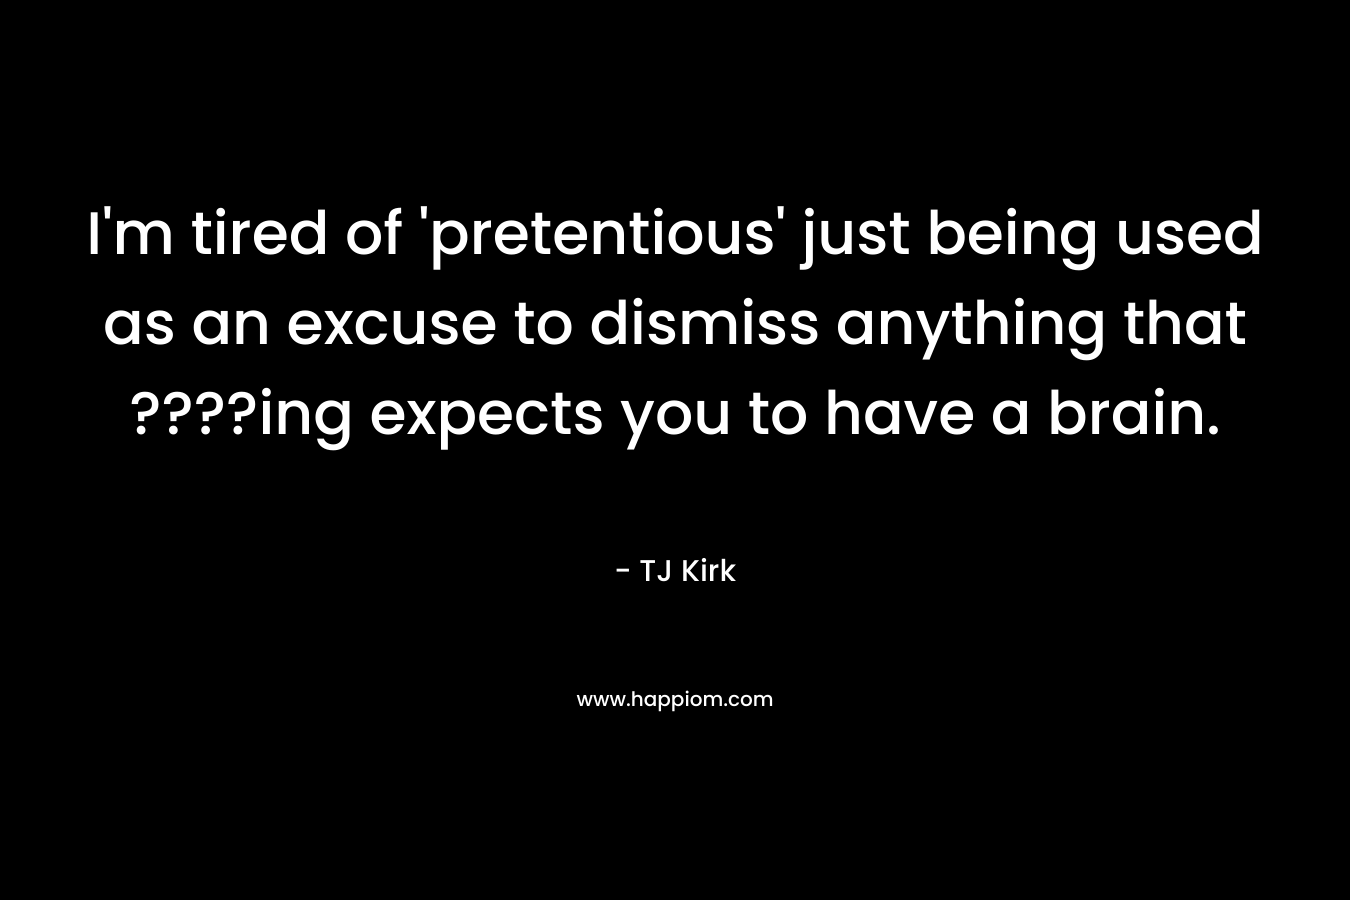 I’m tired of ‘pretentious’ just being used as an excuse to dismiss anything that ????ing expects you to have a brain. – TJ Kirk